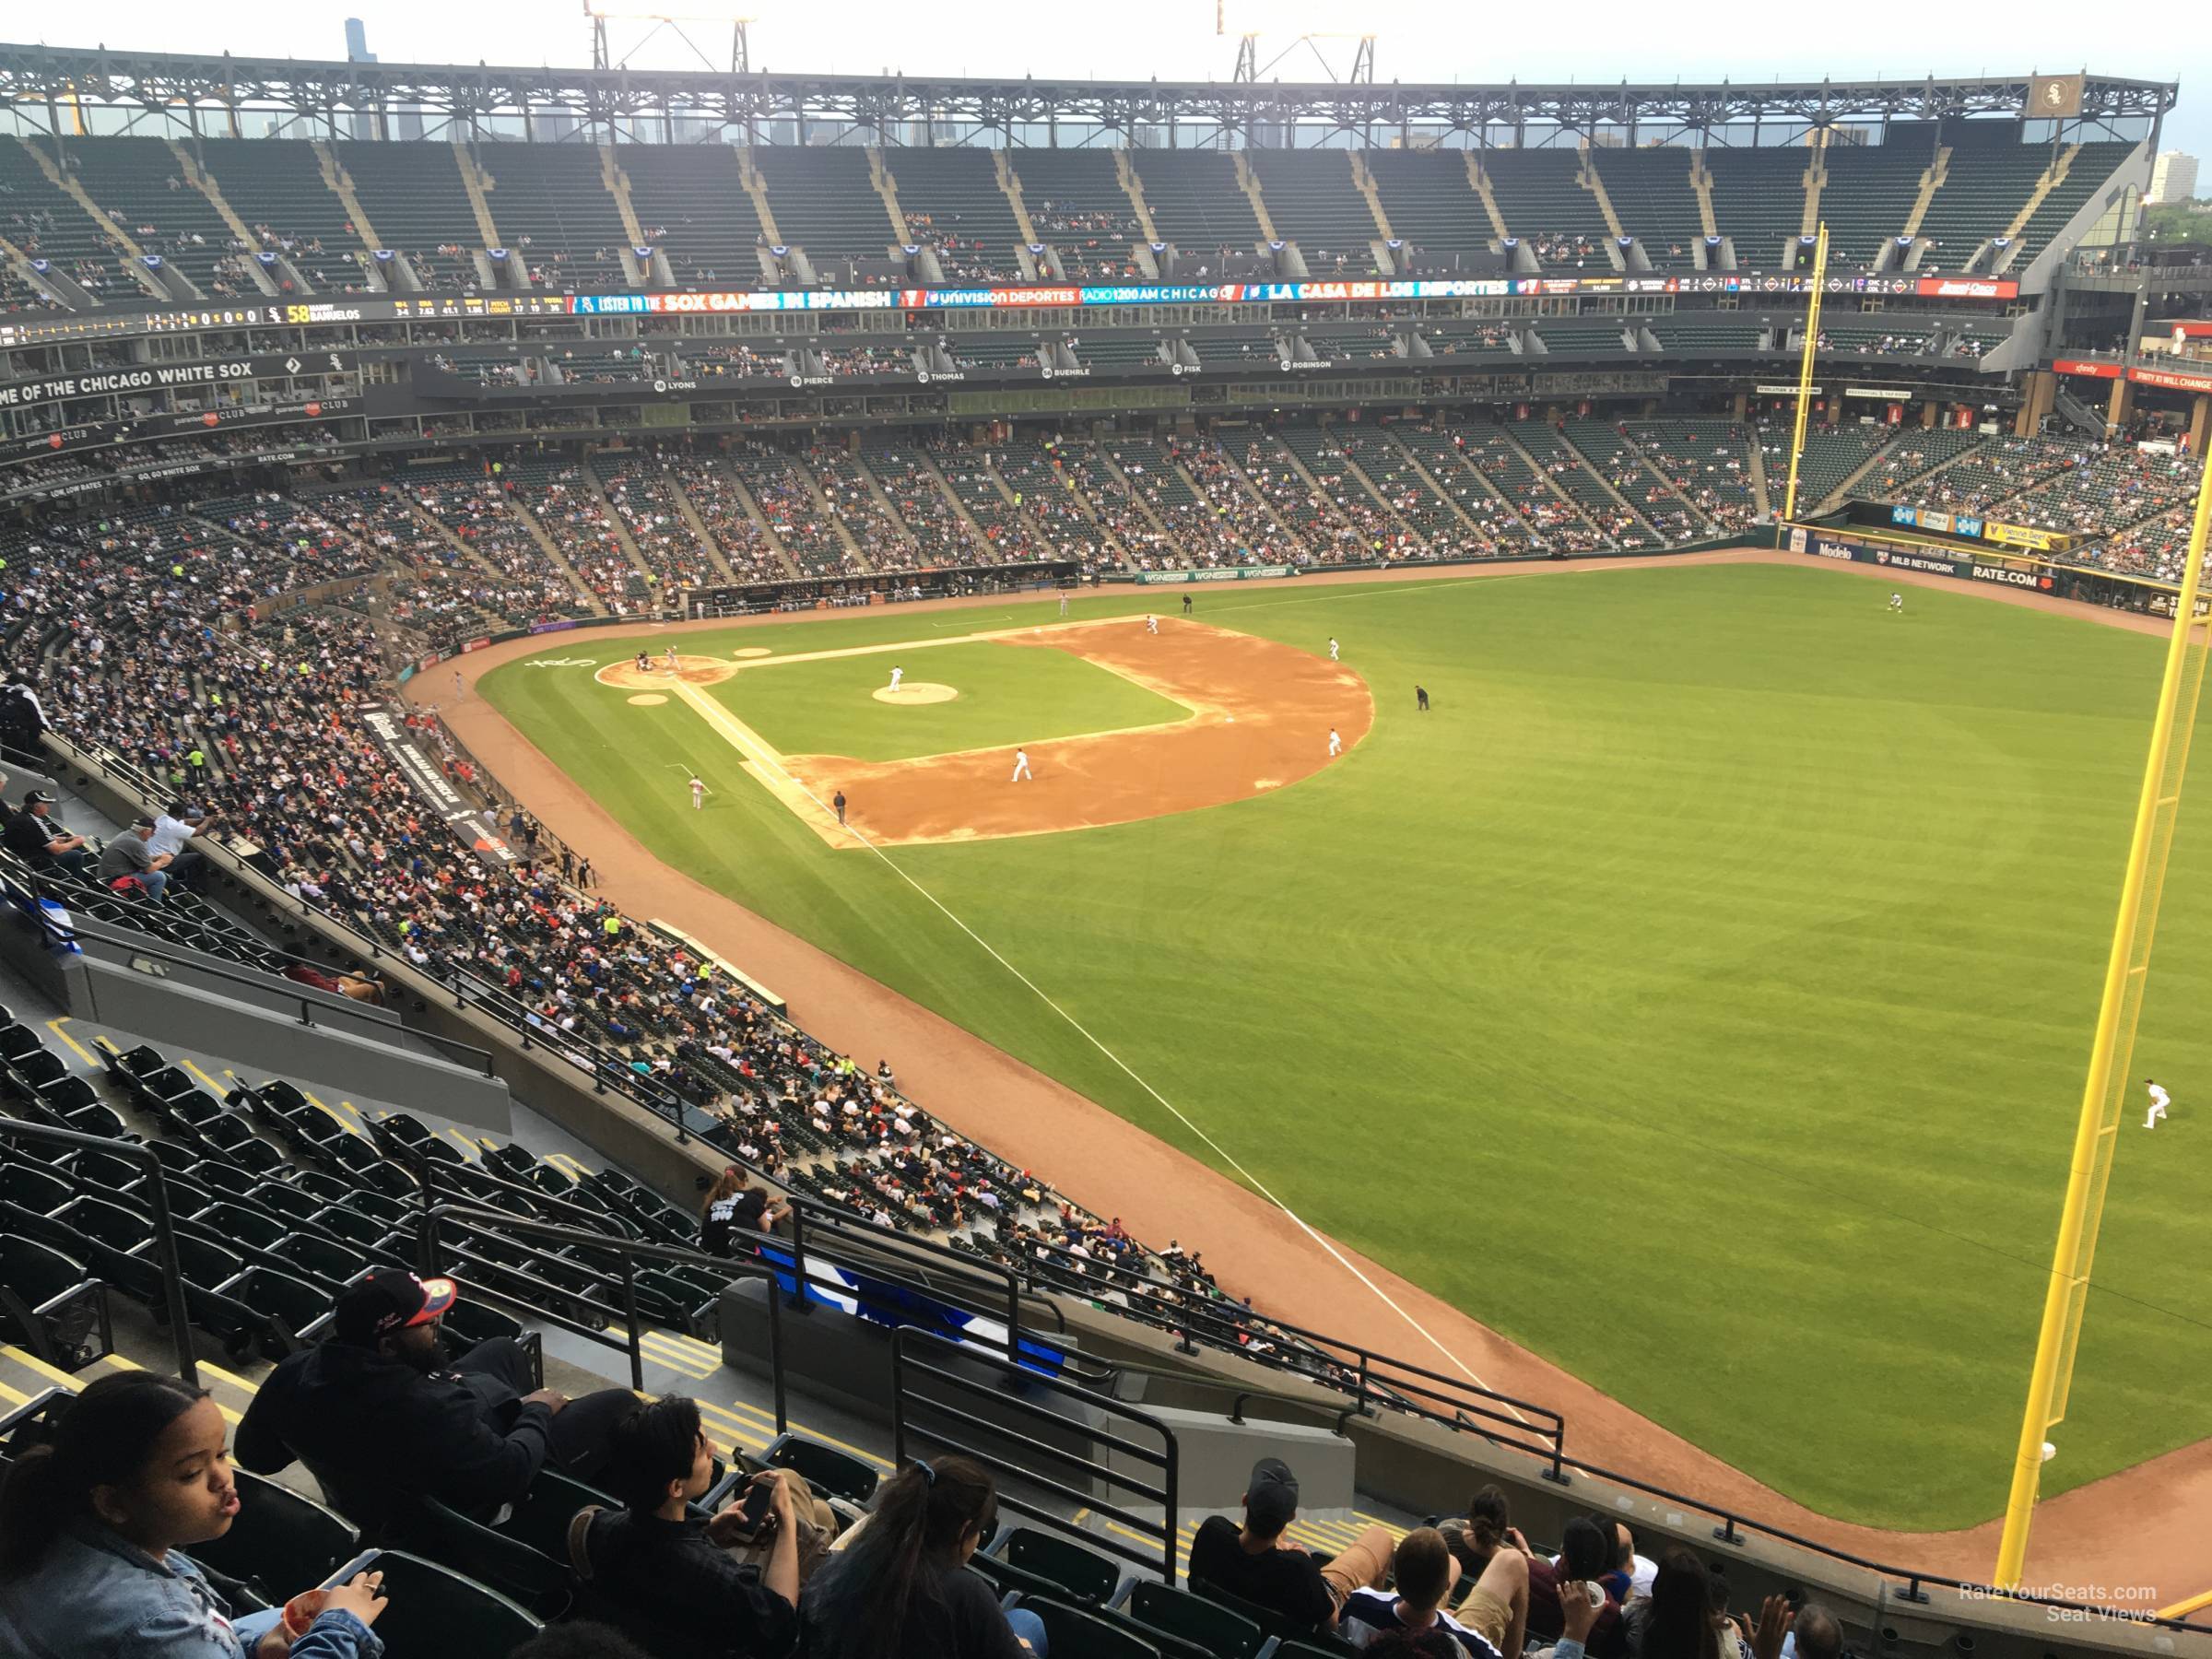 section 509, row 12 seat view  - guaranteed rate field